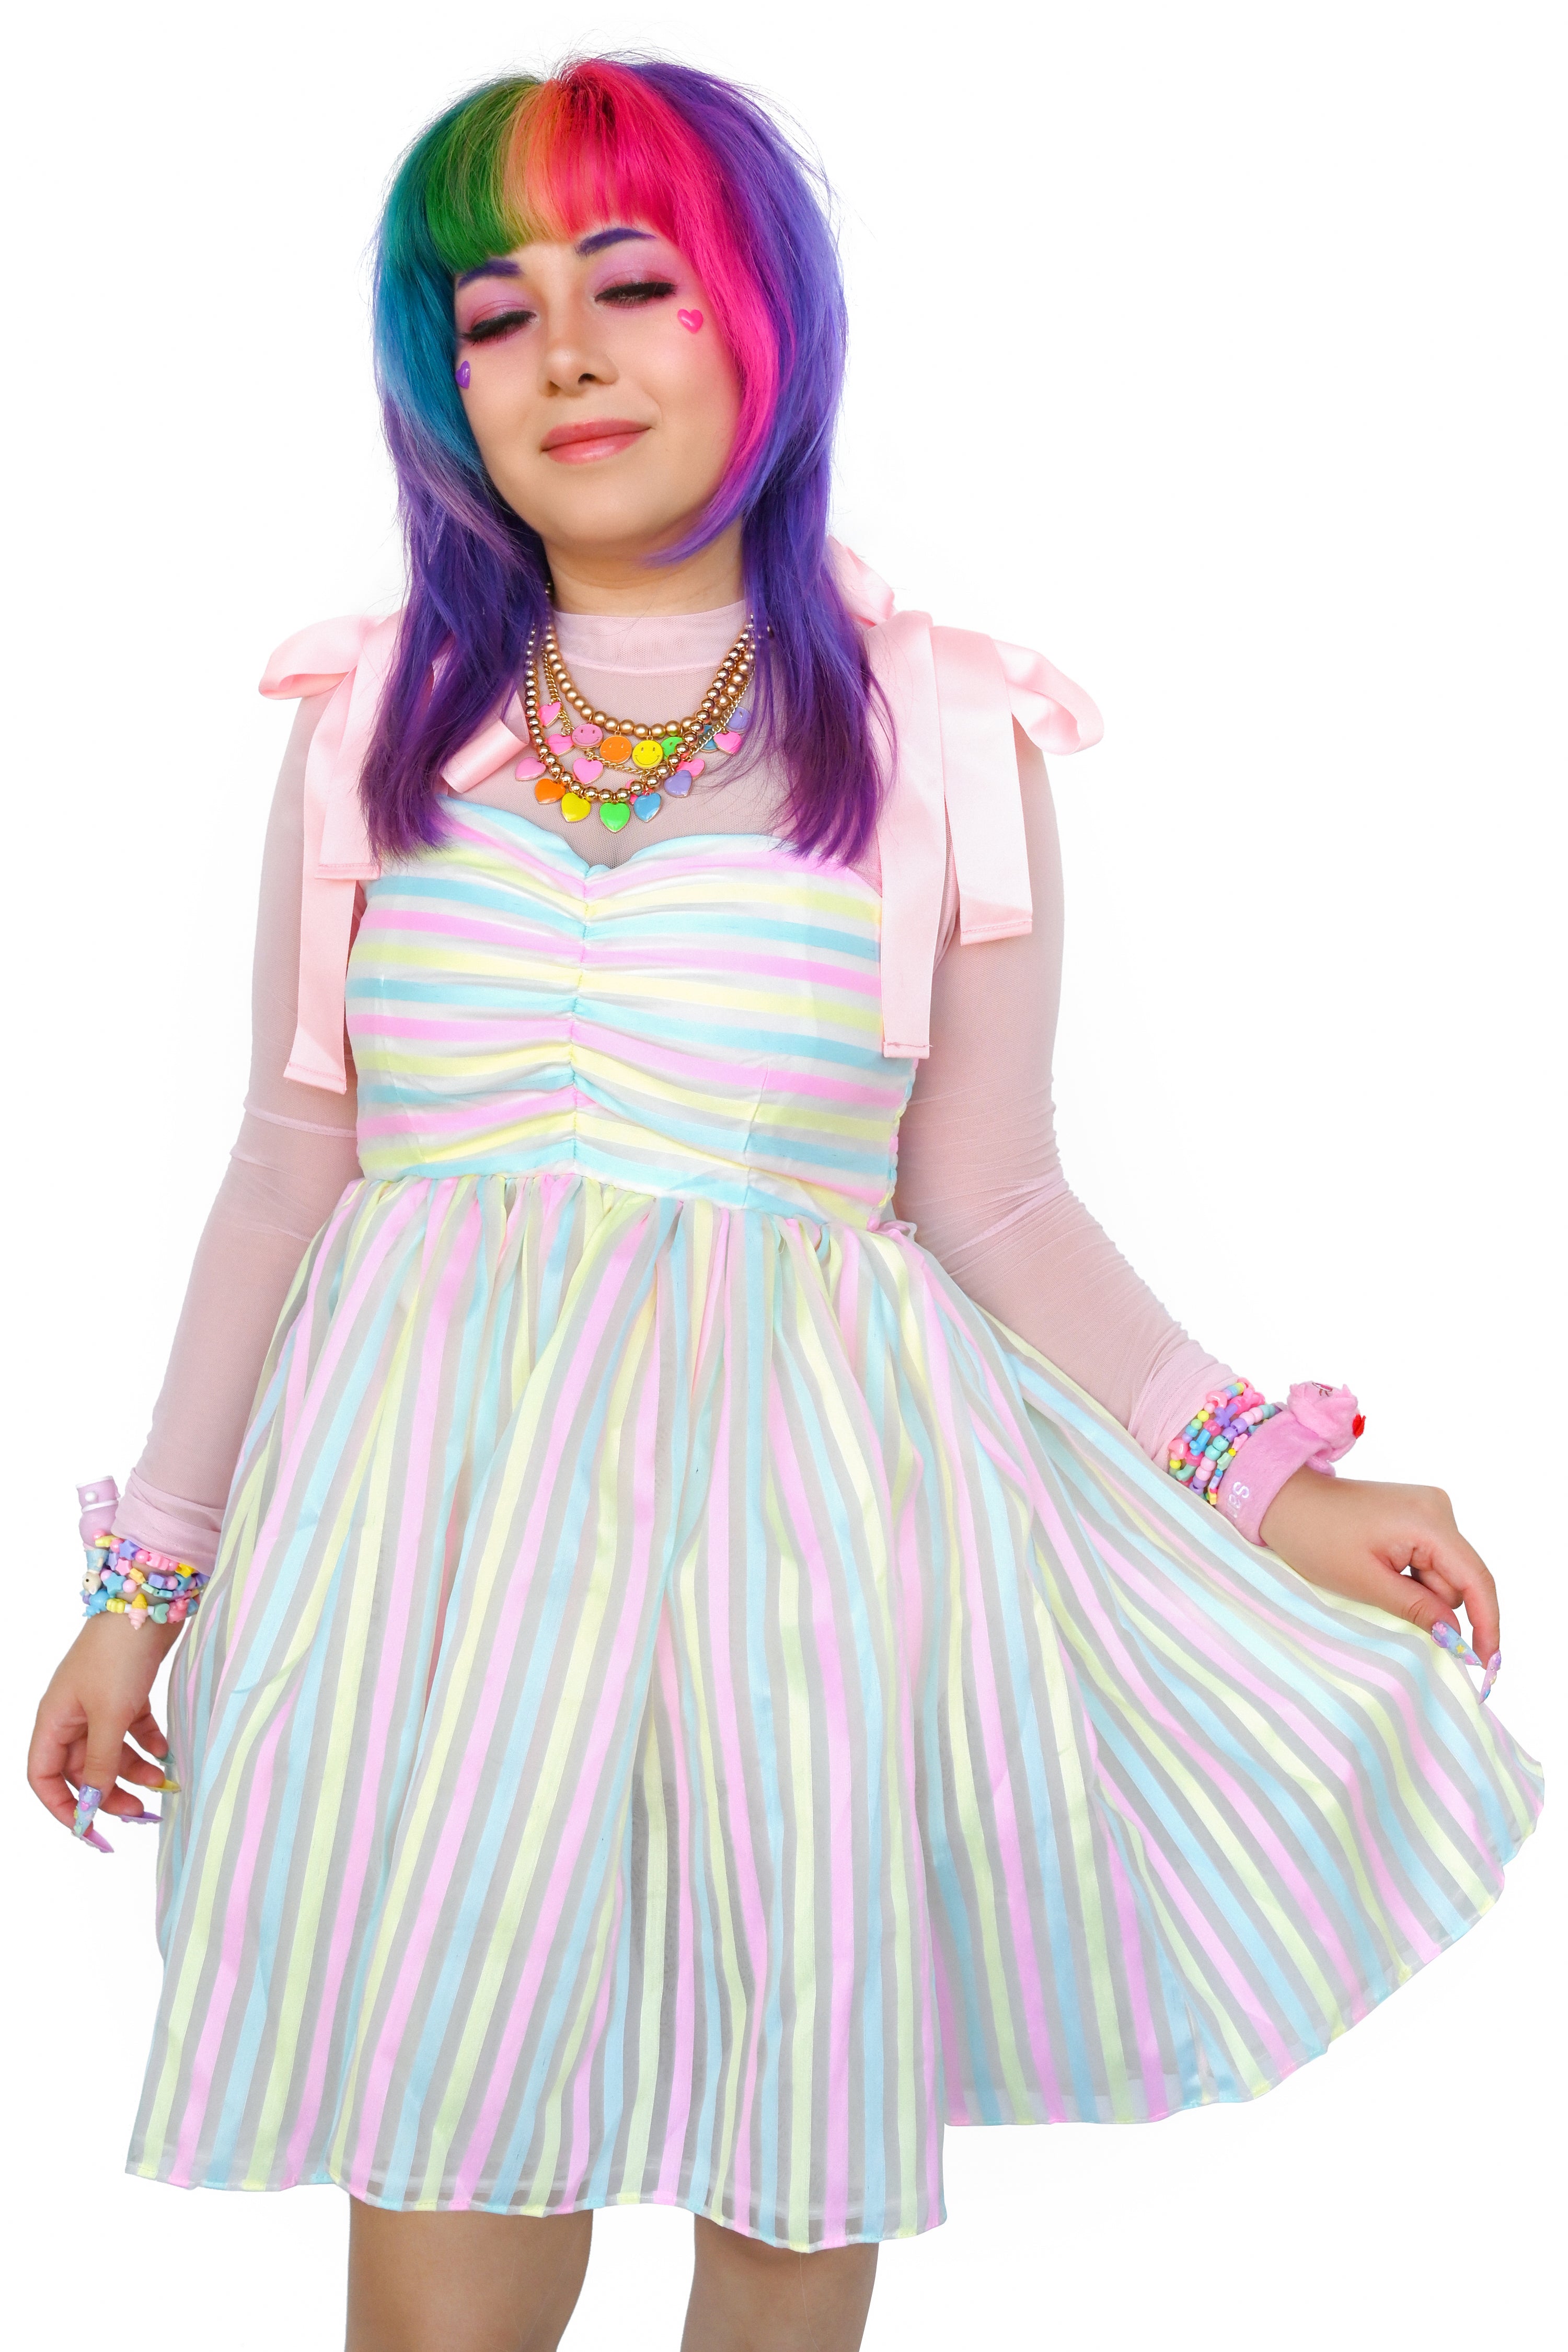 Pink ribbon straps, horizontal pastel yellow, blue, and pink stripes on the ruched bodice and a cupcake style sheer vertical striped skirt over a white slip